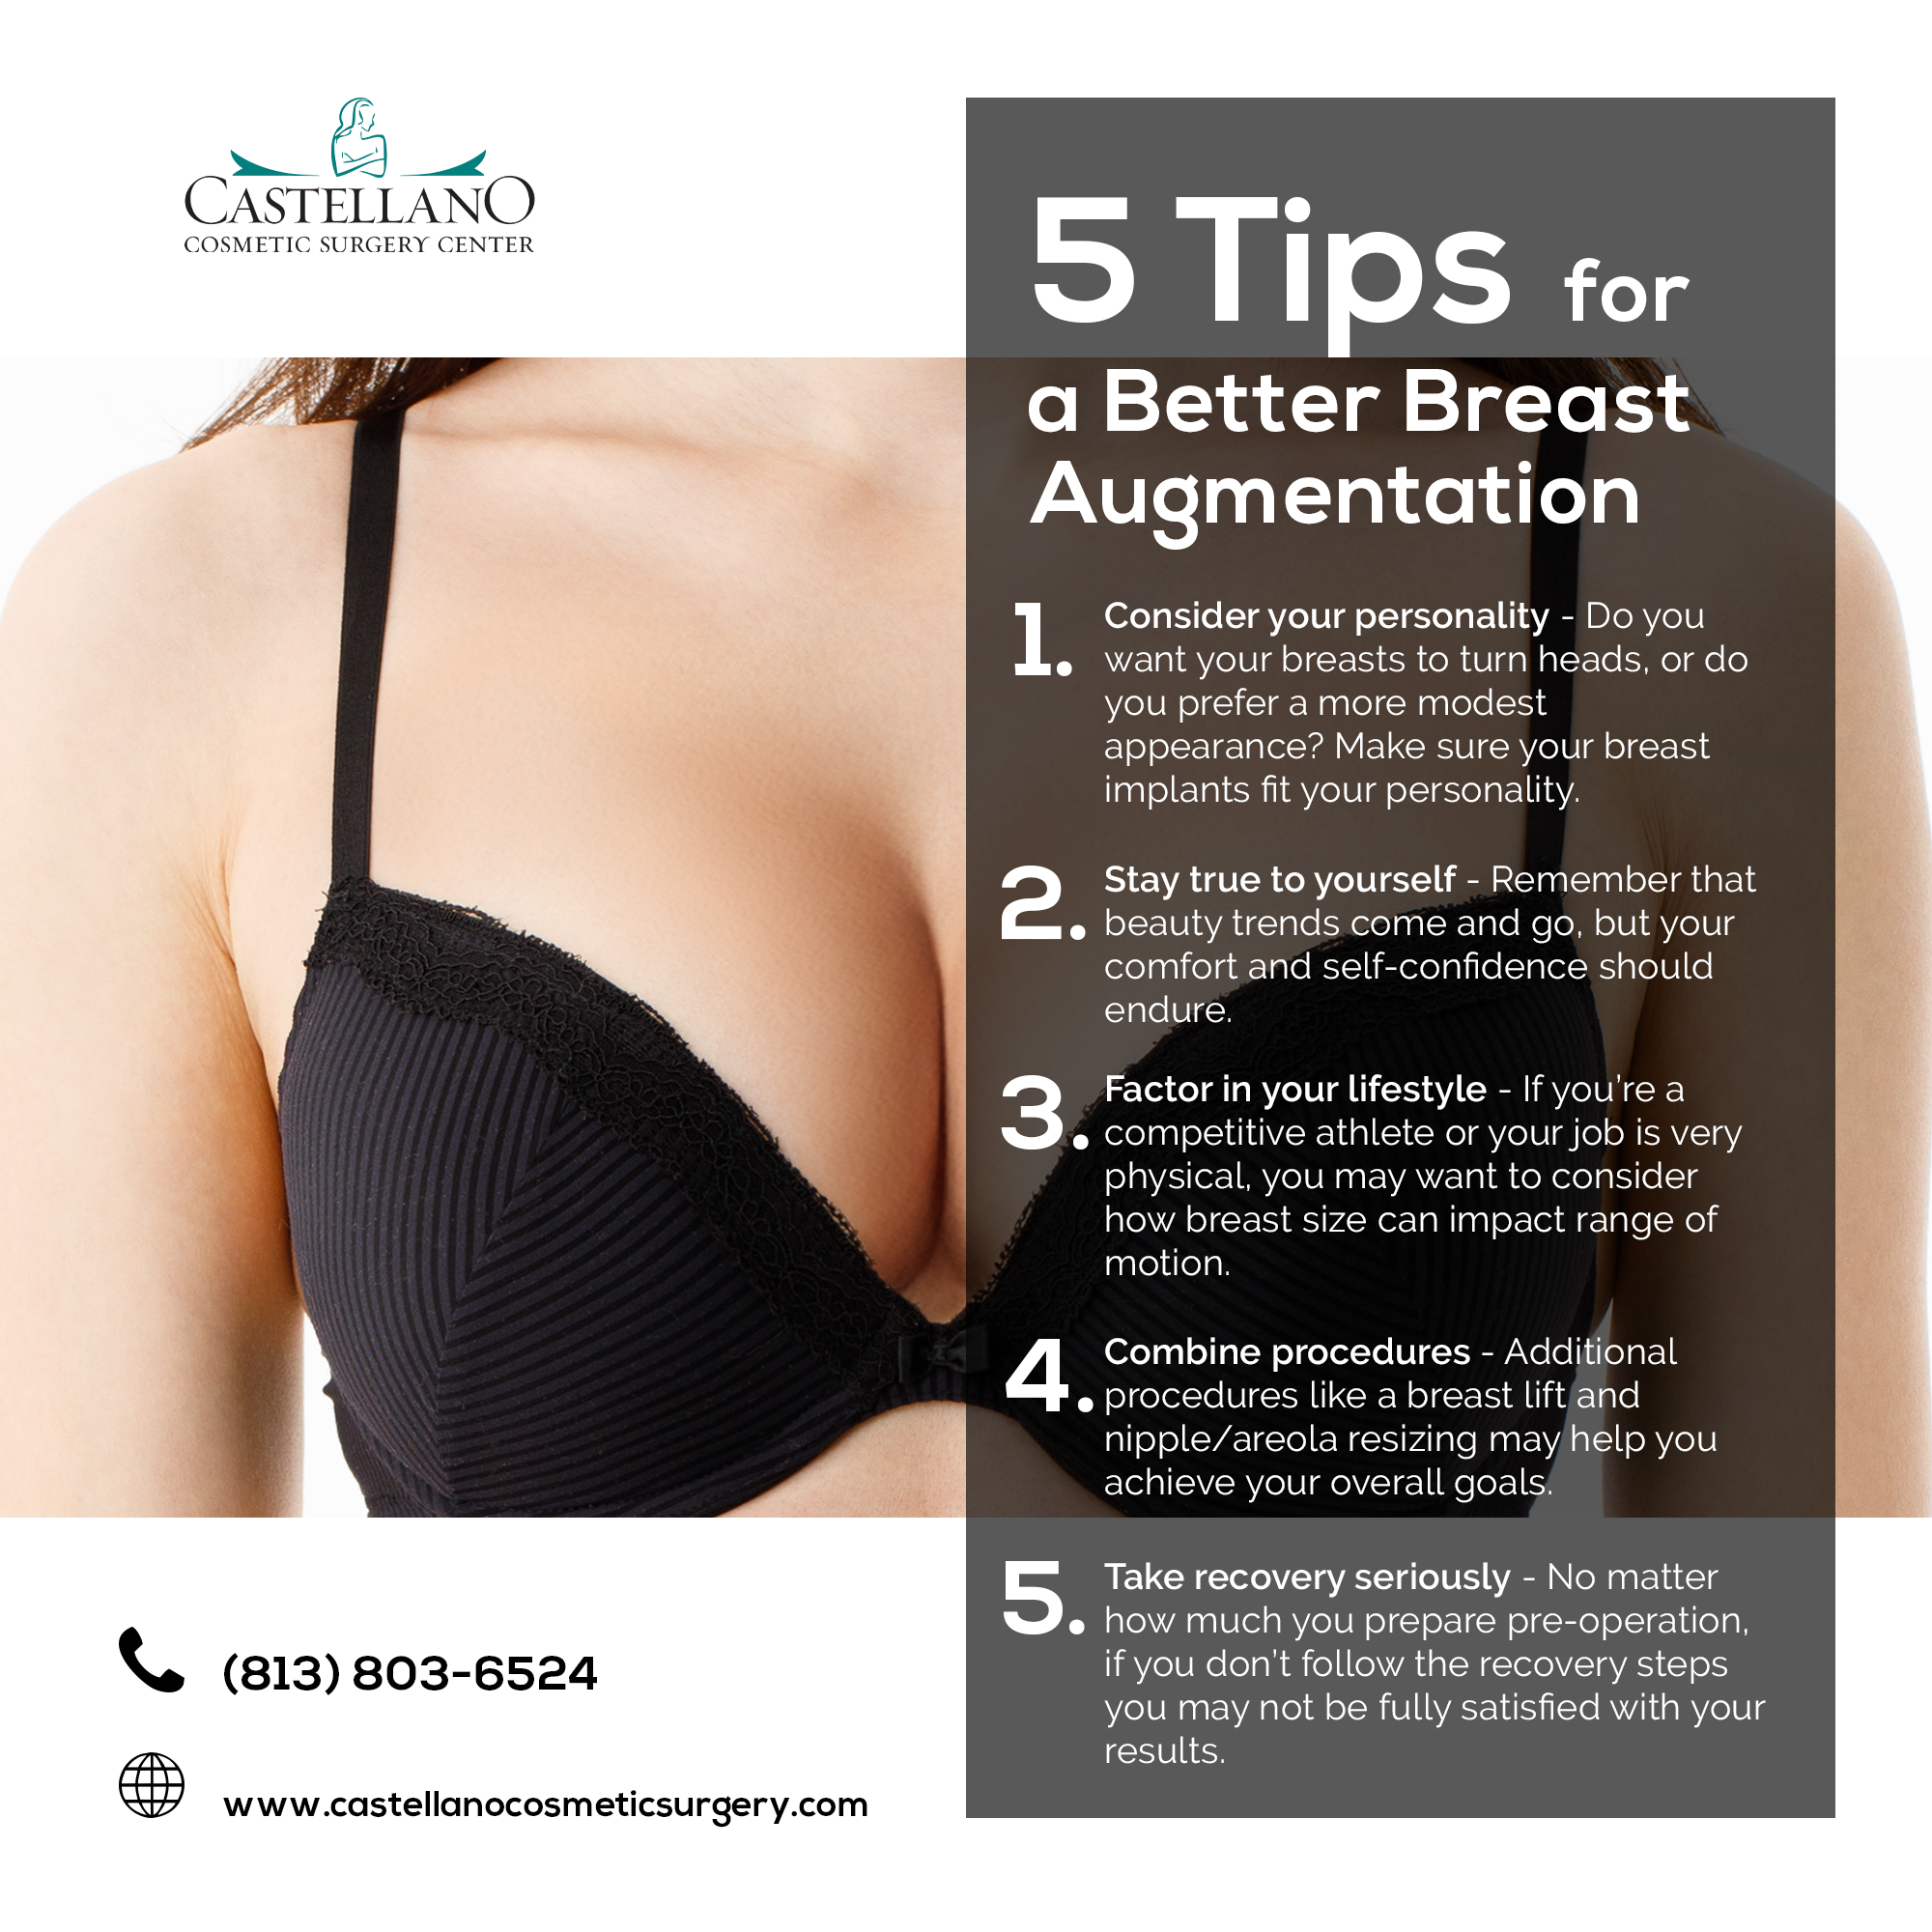 5 Tips for a Better Breast Augmentation